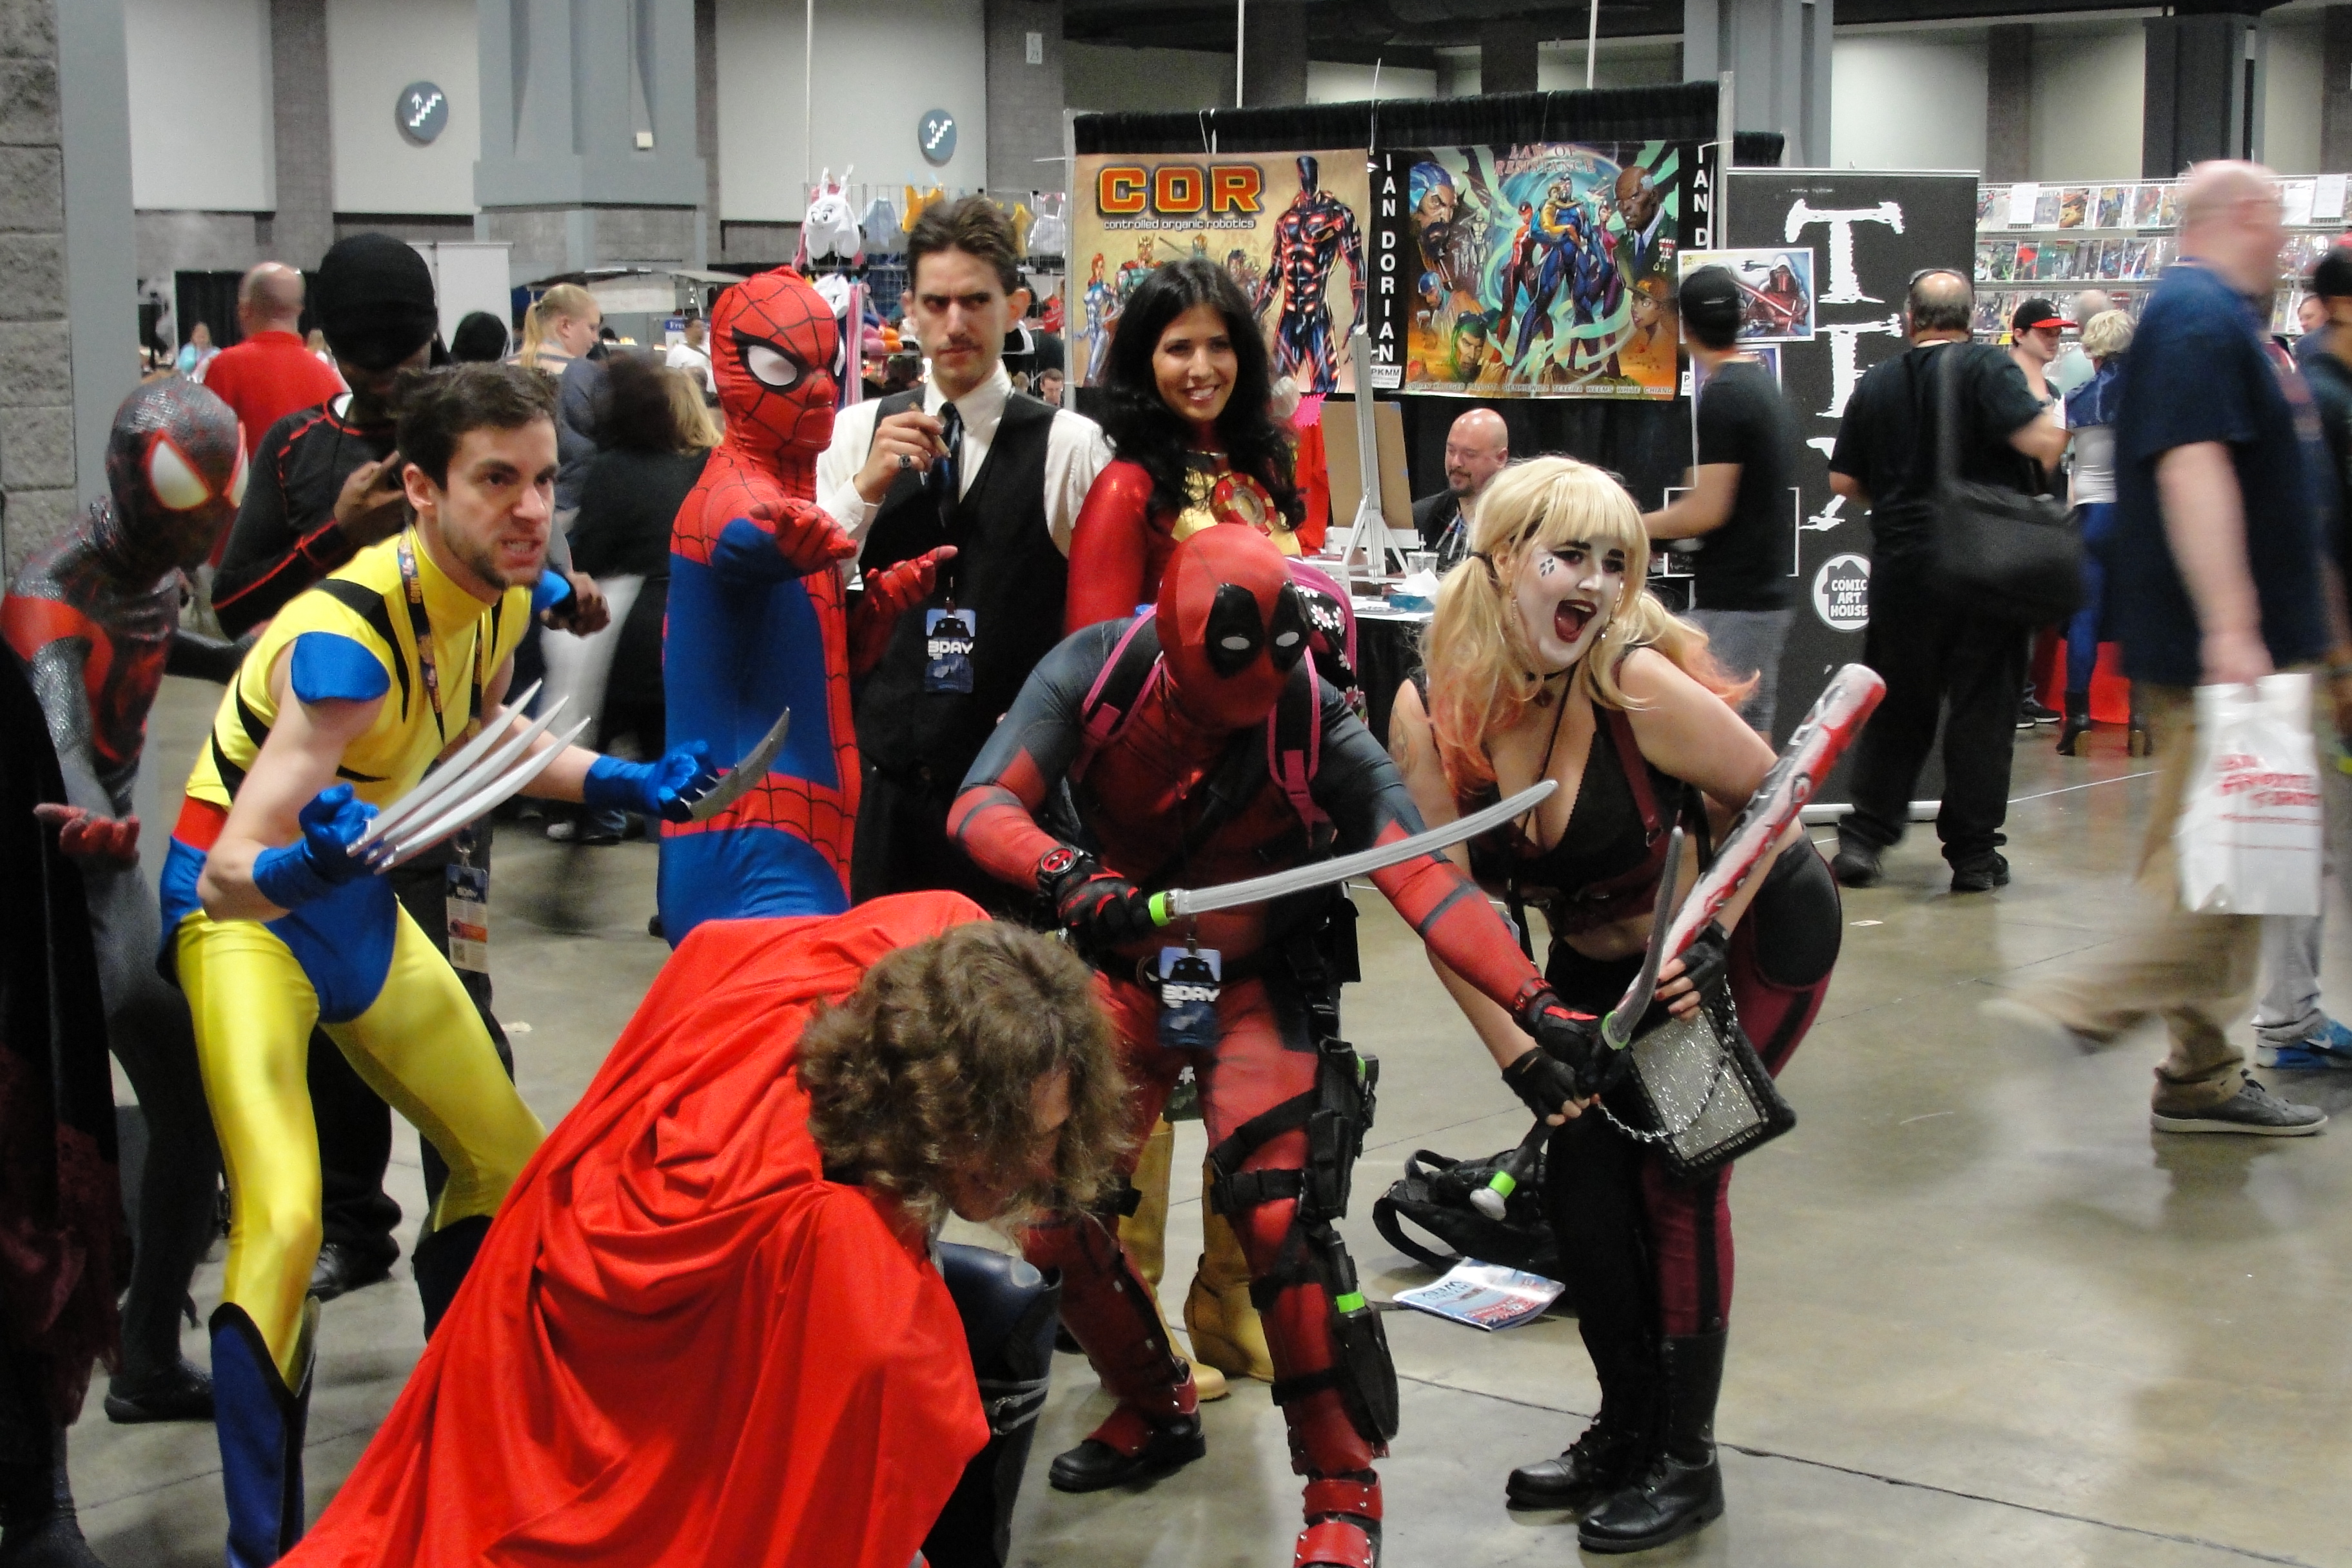 Geek unity: DC’s Awesome Con brings together super heroes, villains, celebs and costumes (Photos)